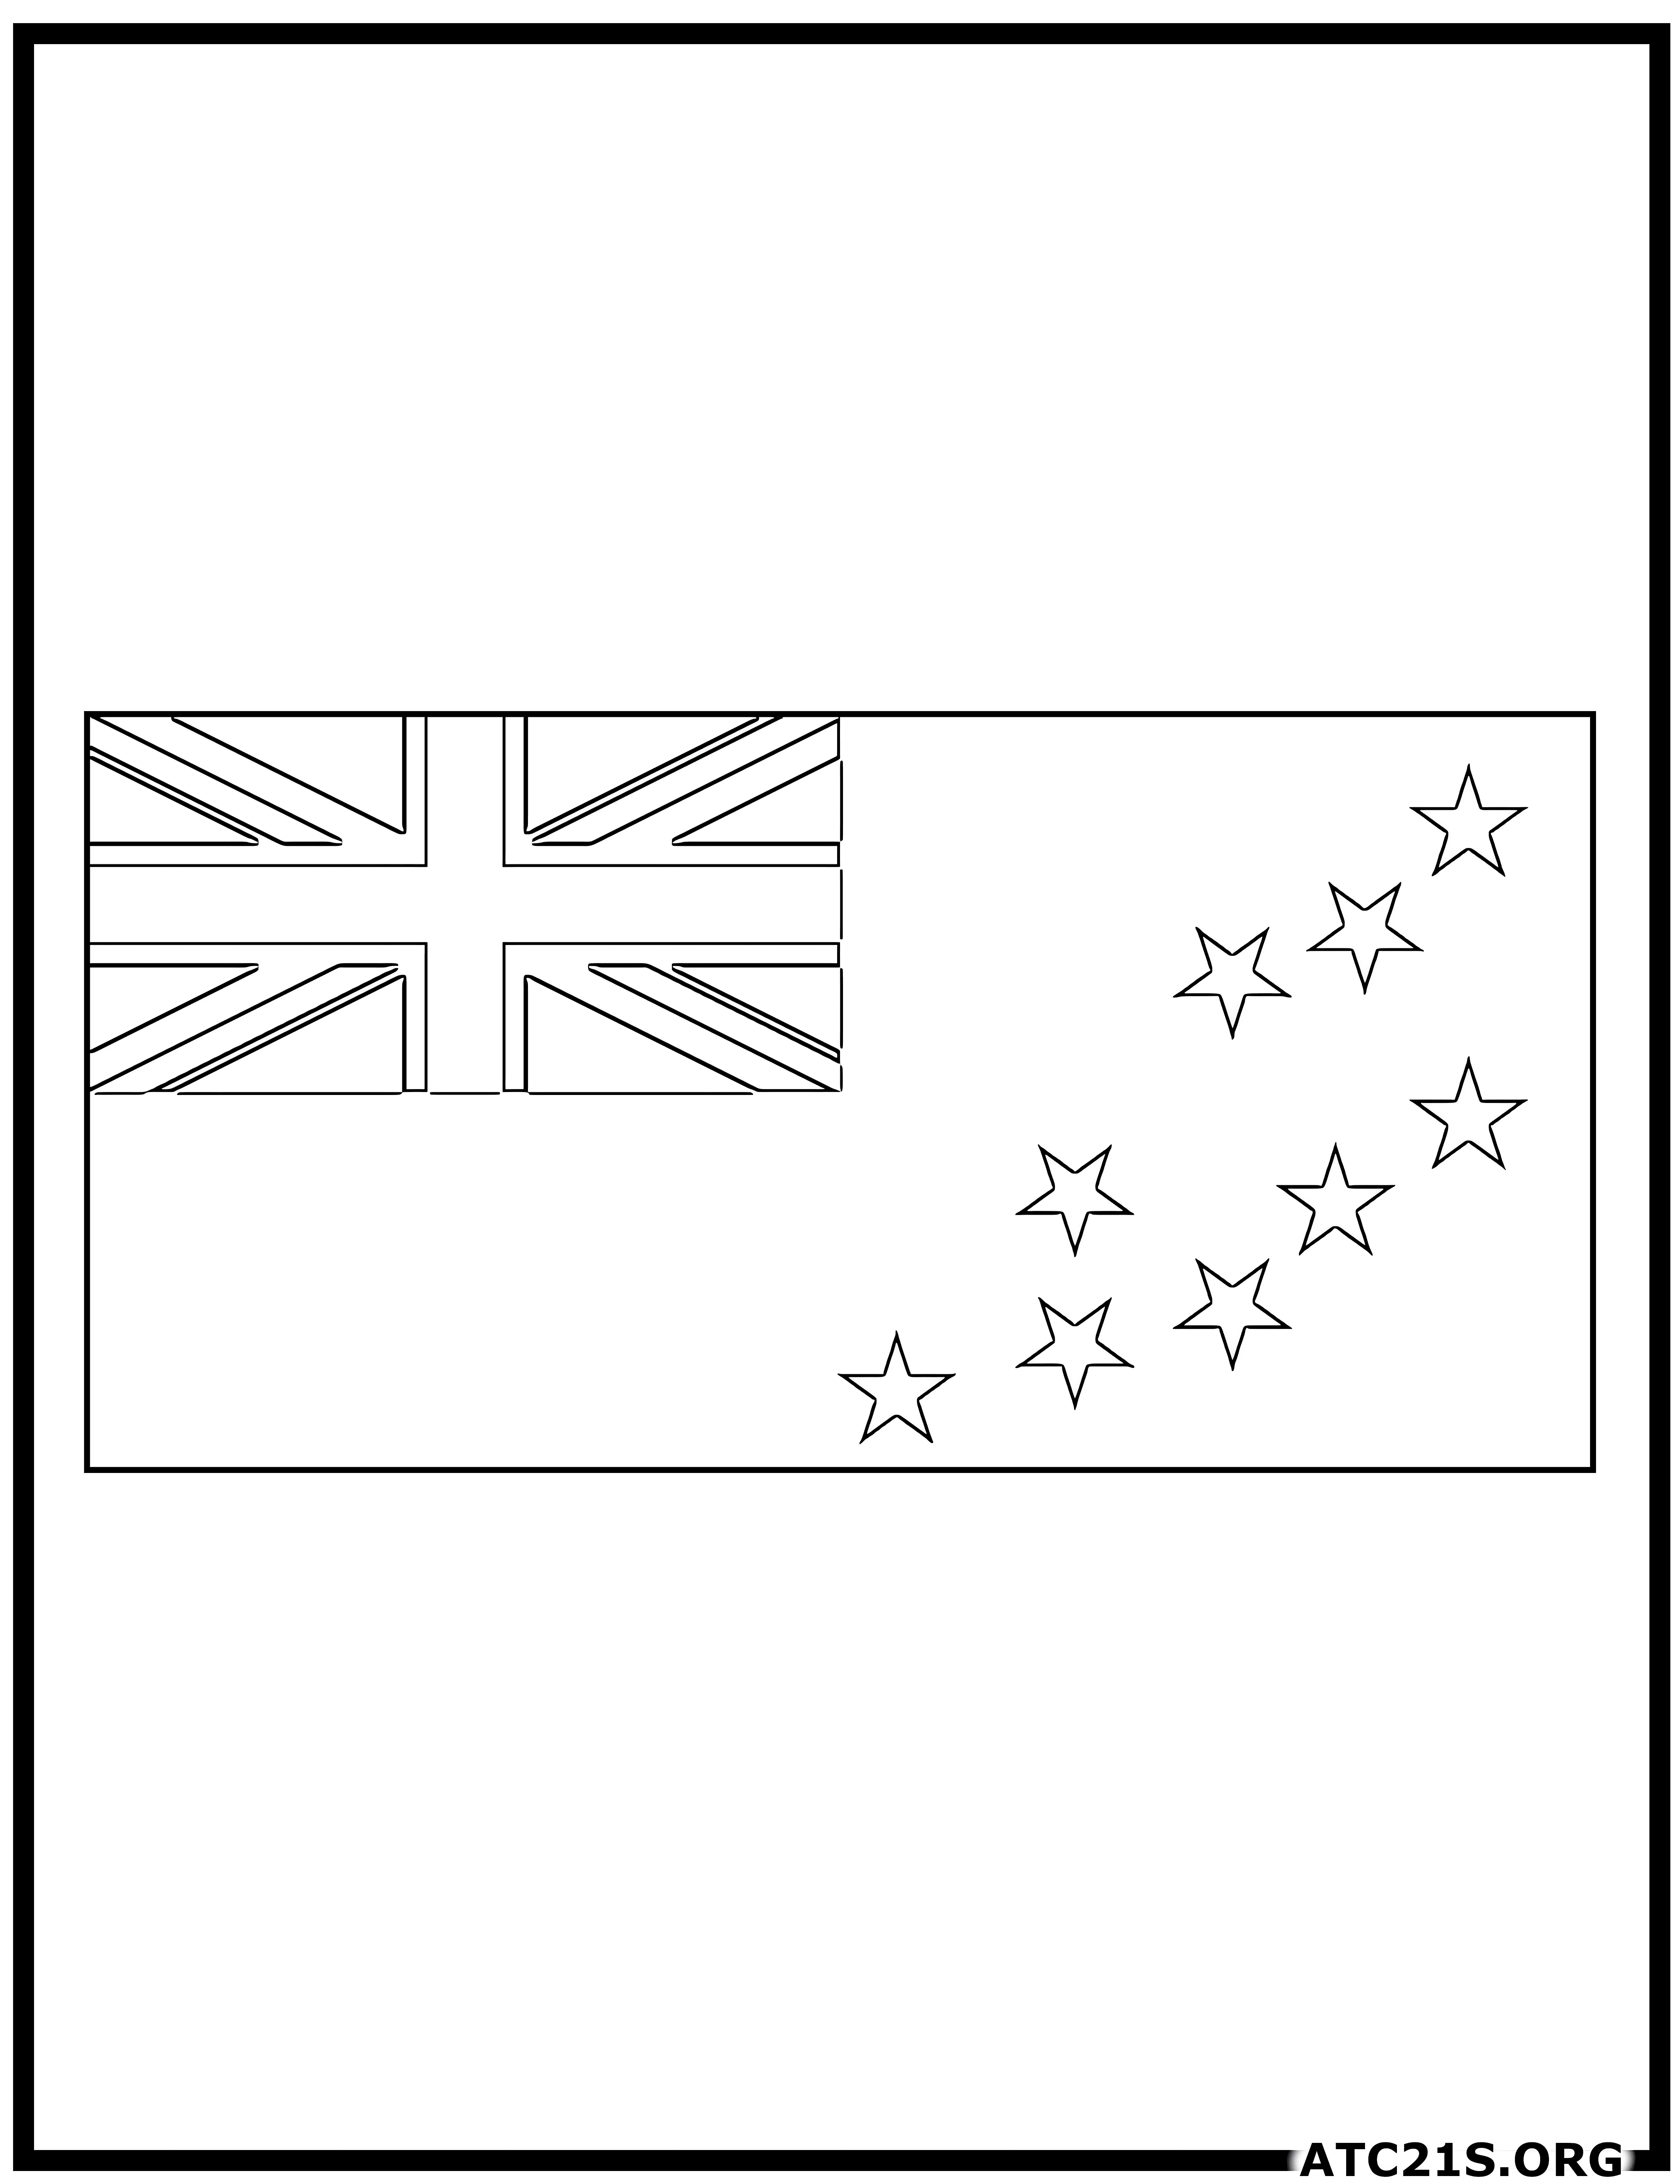 Tuvalu flag coloring page